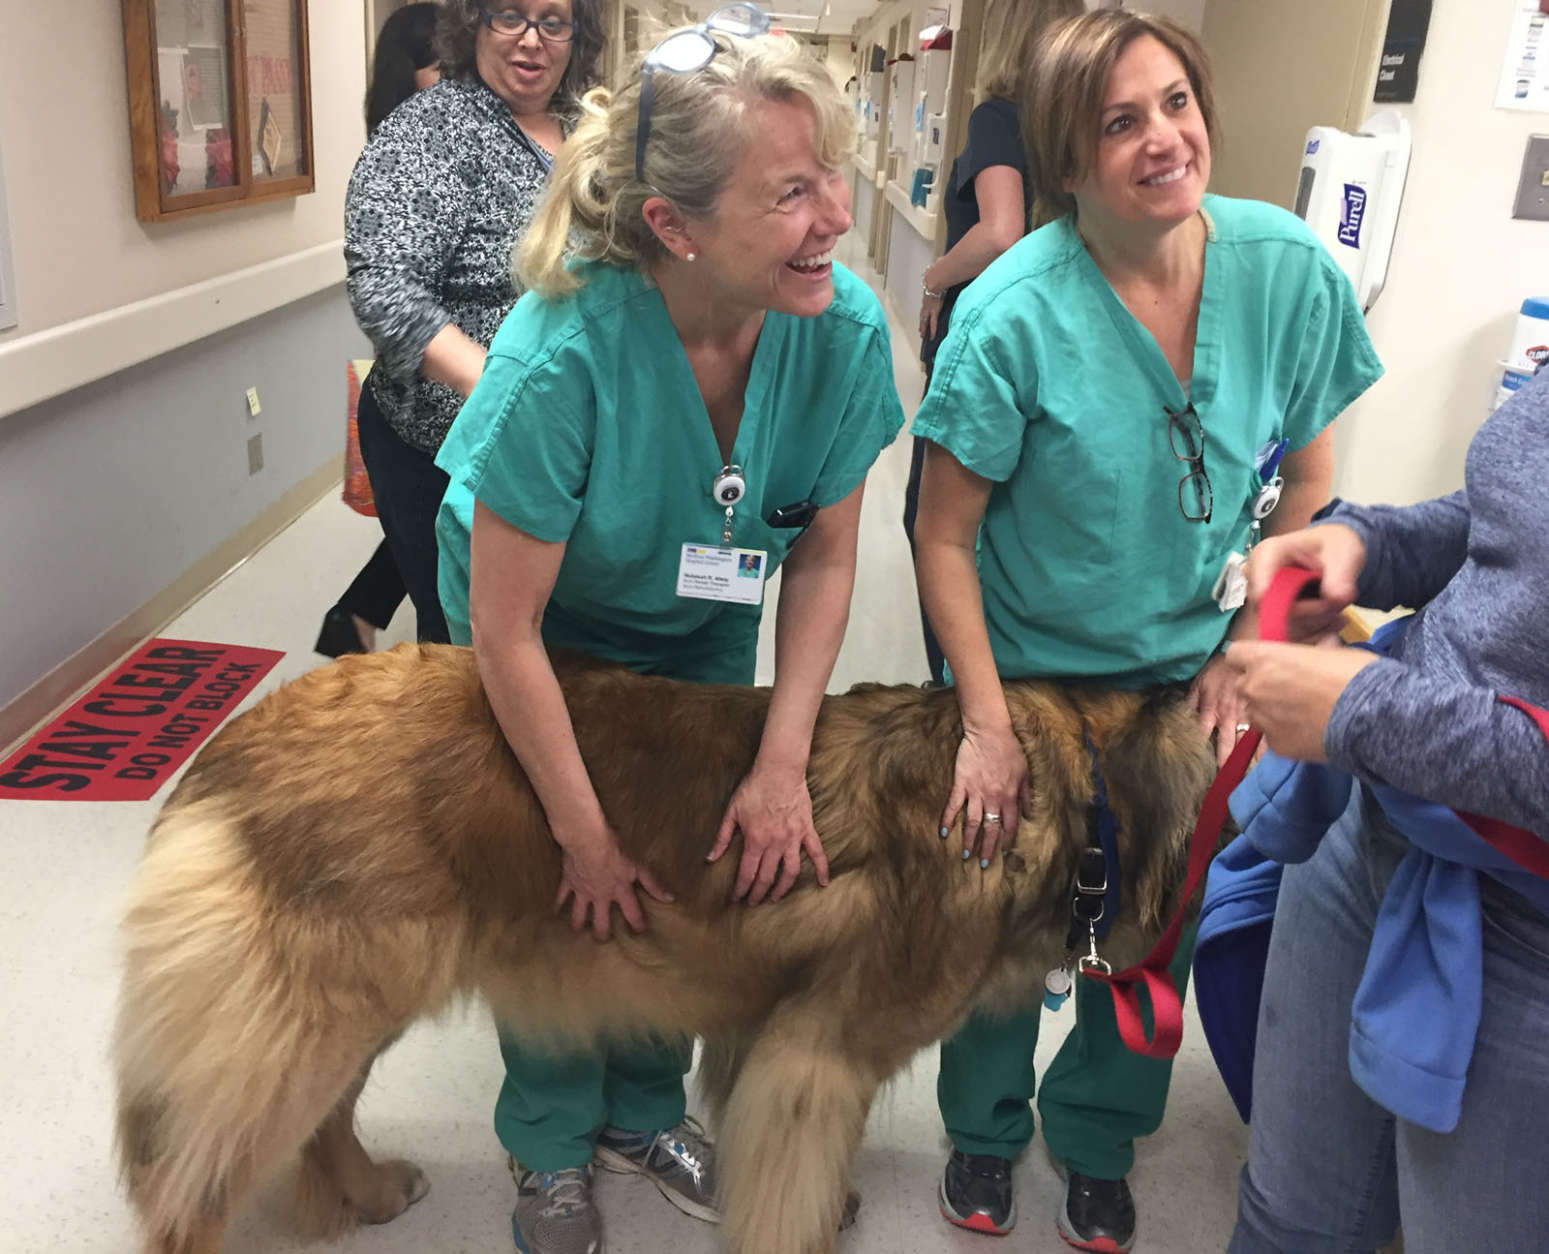 Two staffers at MedStar Washington Hospital Center meet Sully the Leonberger, a therapy dog. (WTOP/Michelle Basch)